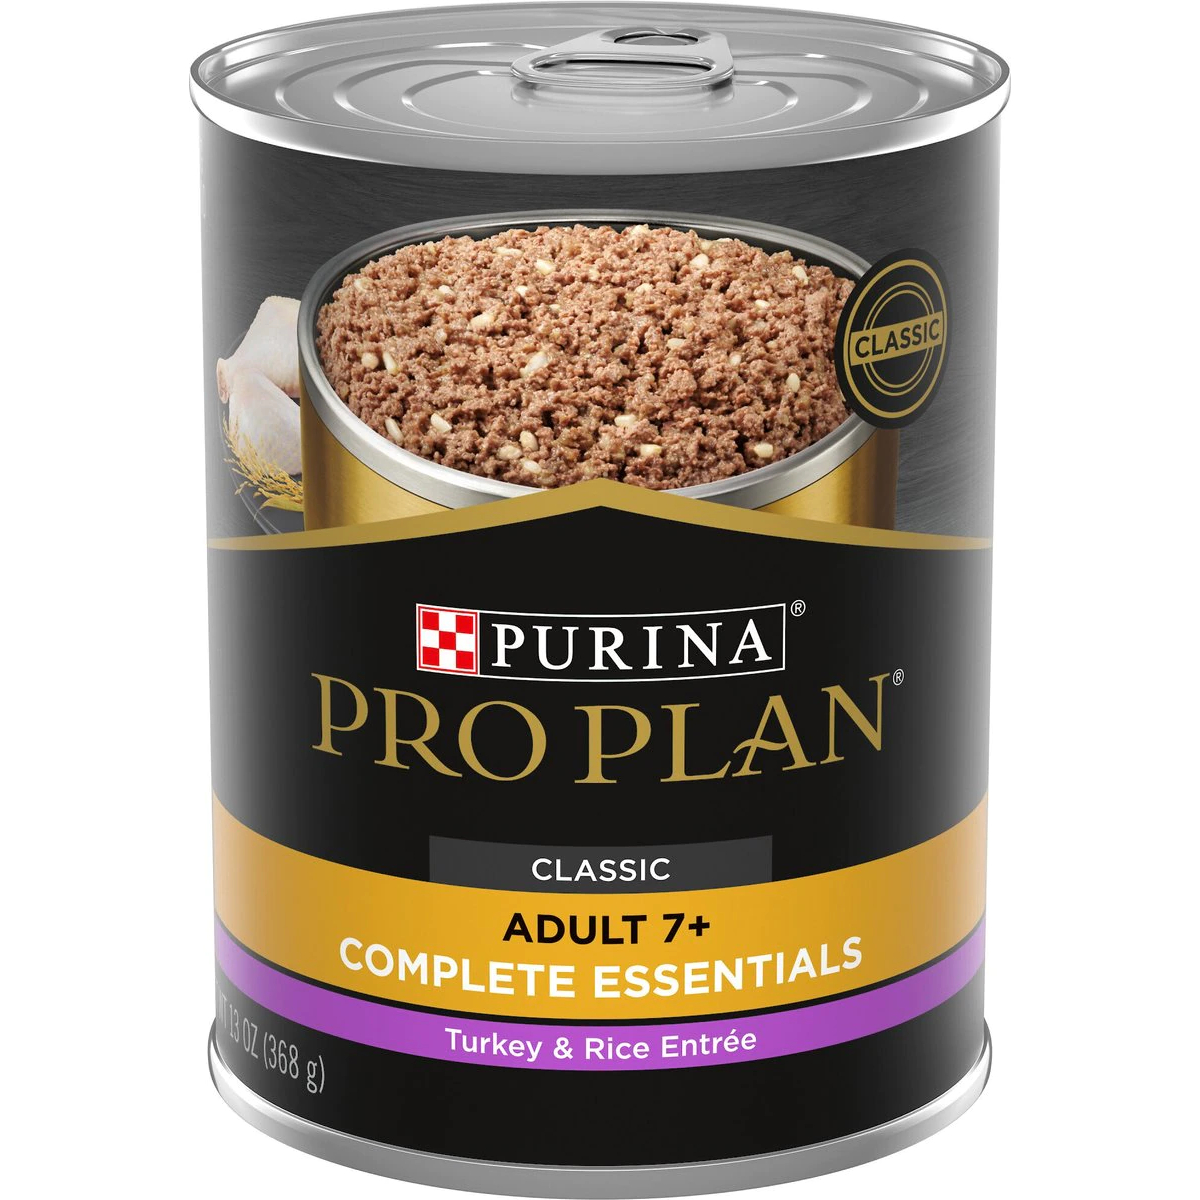 New Project Purina Pro Plan Adult 7+ Complete Essentials Turkey & Rice Entree Wet Dog Food 